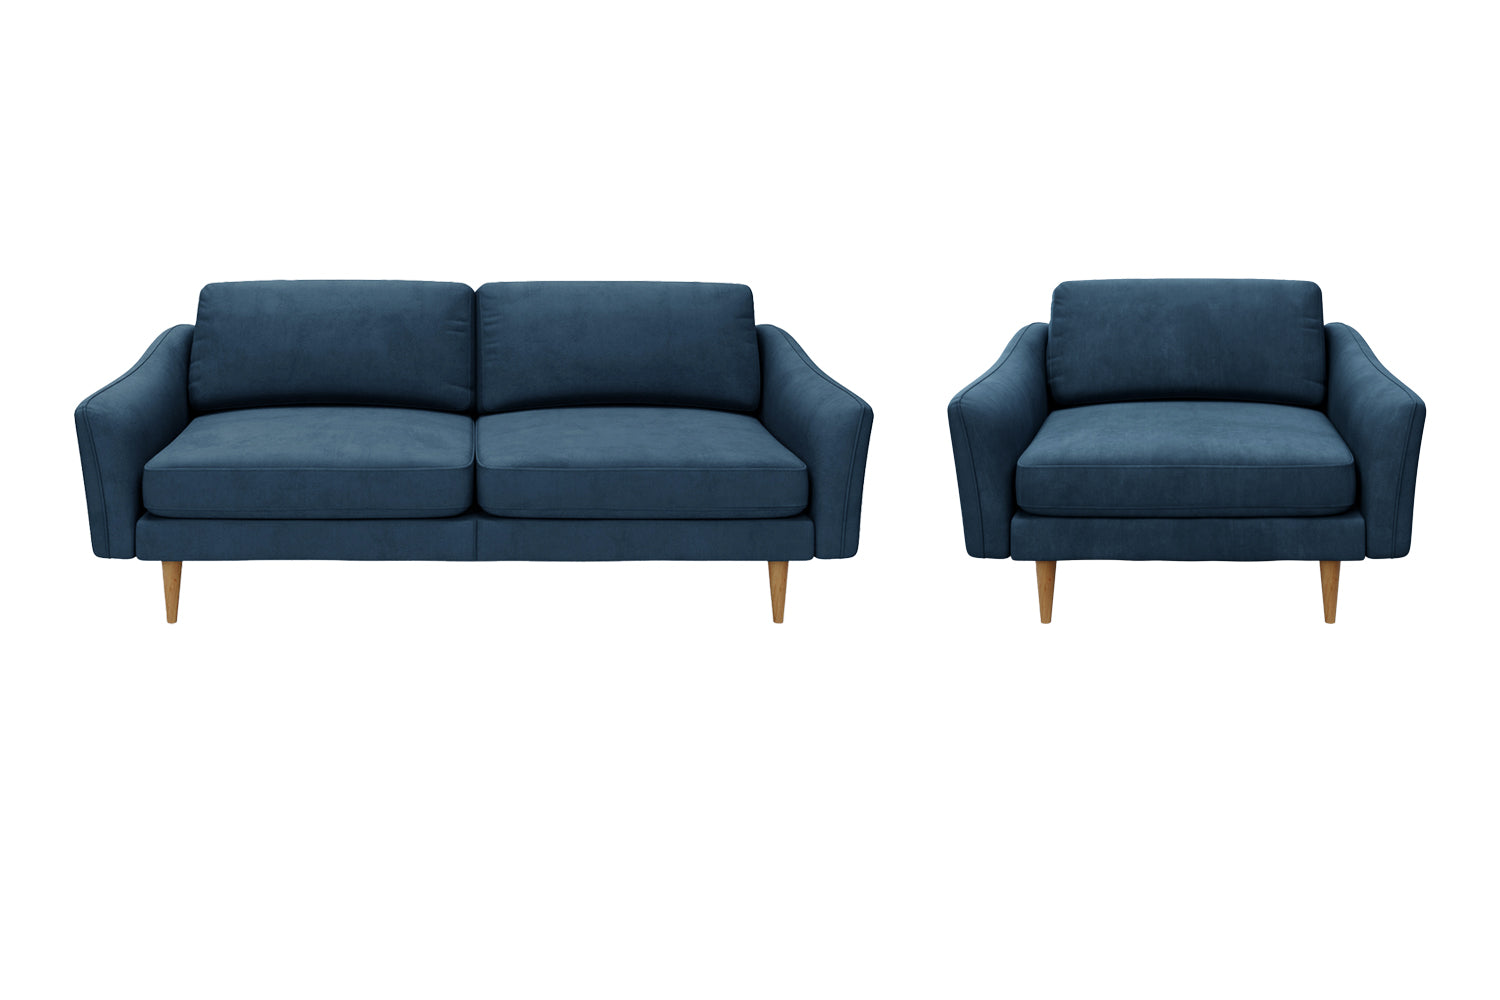 The Rebel - 3 Seater Sofa and 1.5 Seater Snuggler Set - Blue Steel